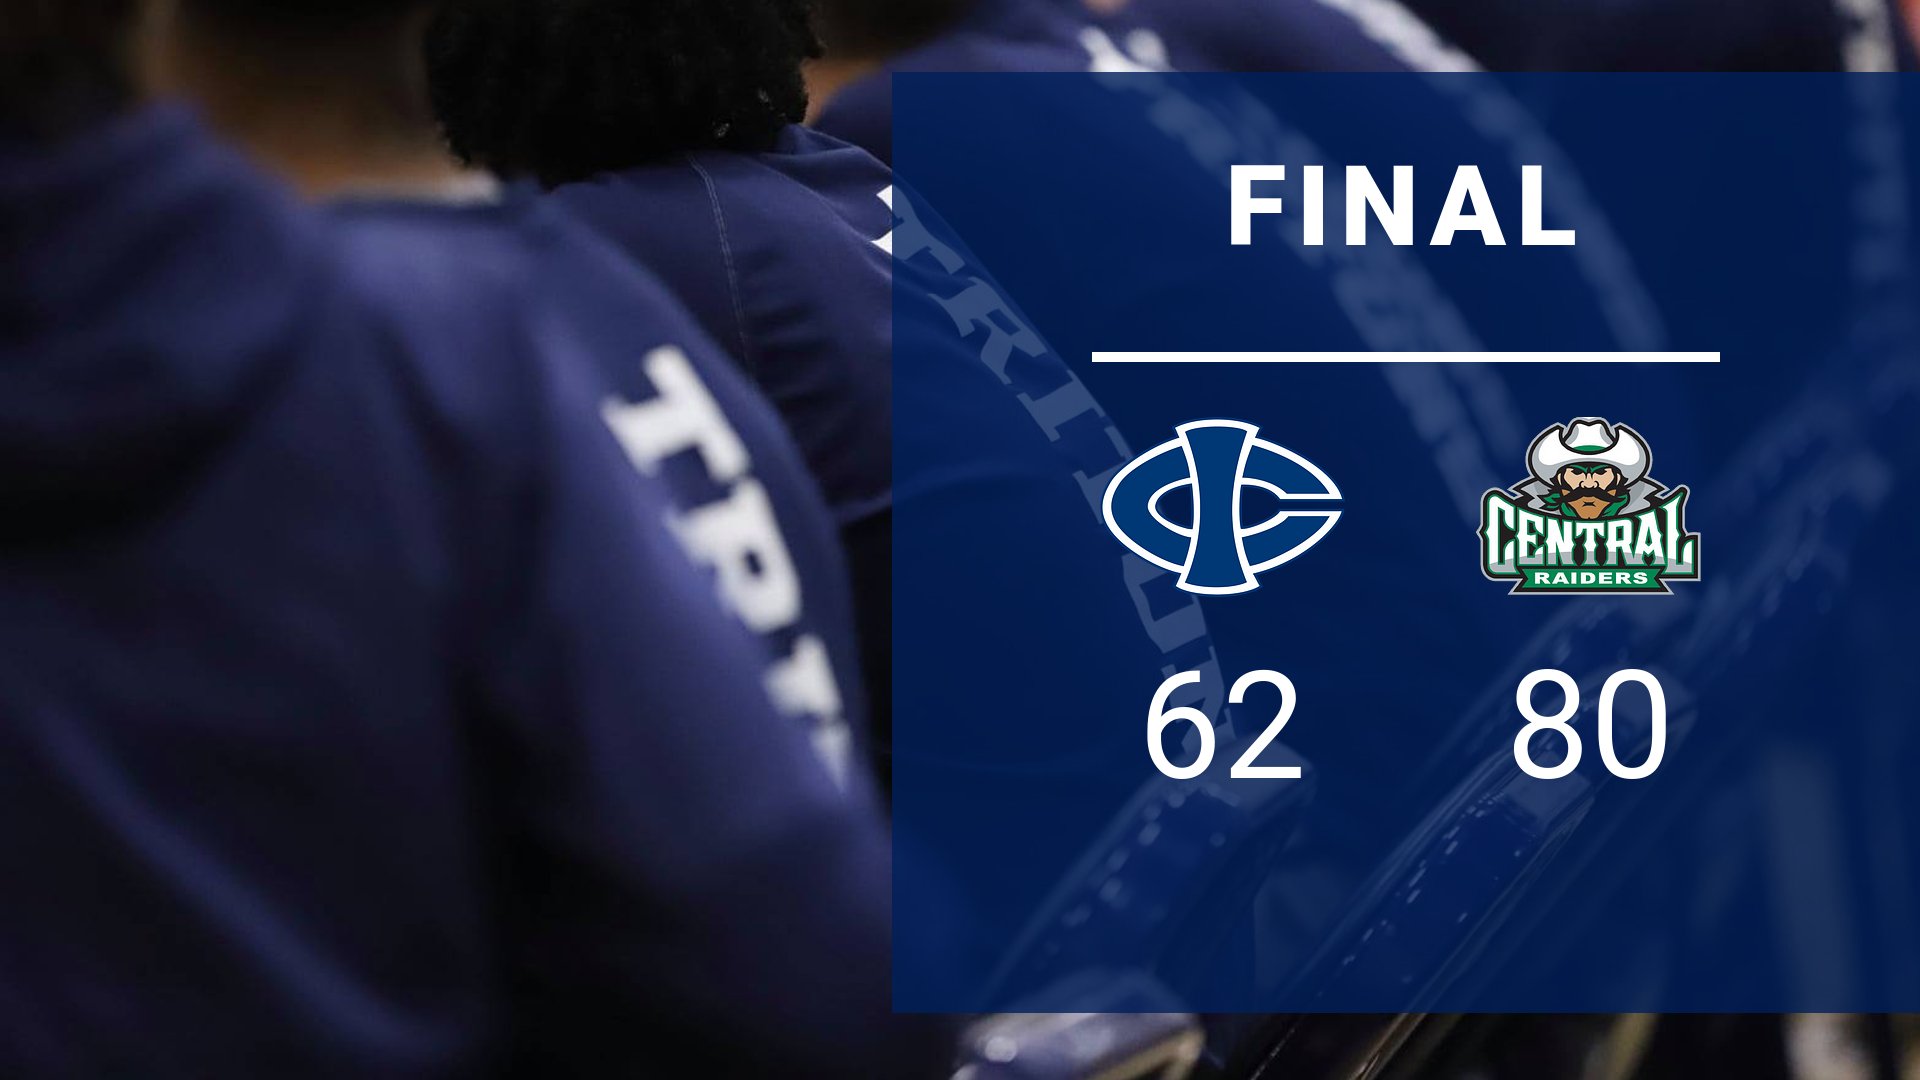 Iowa Central comes up short on the road